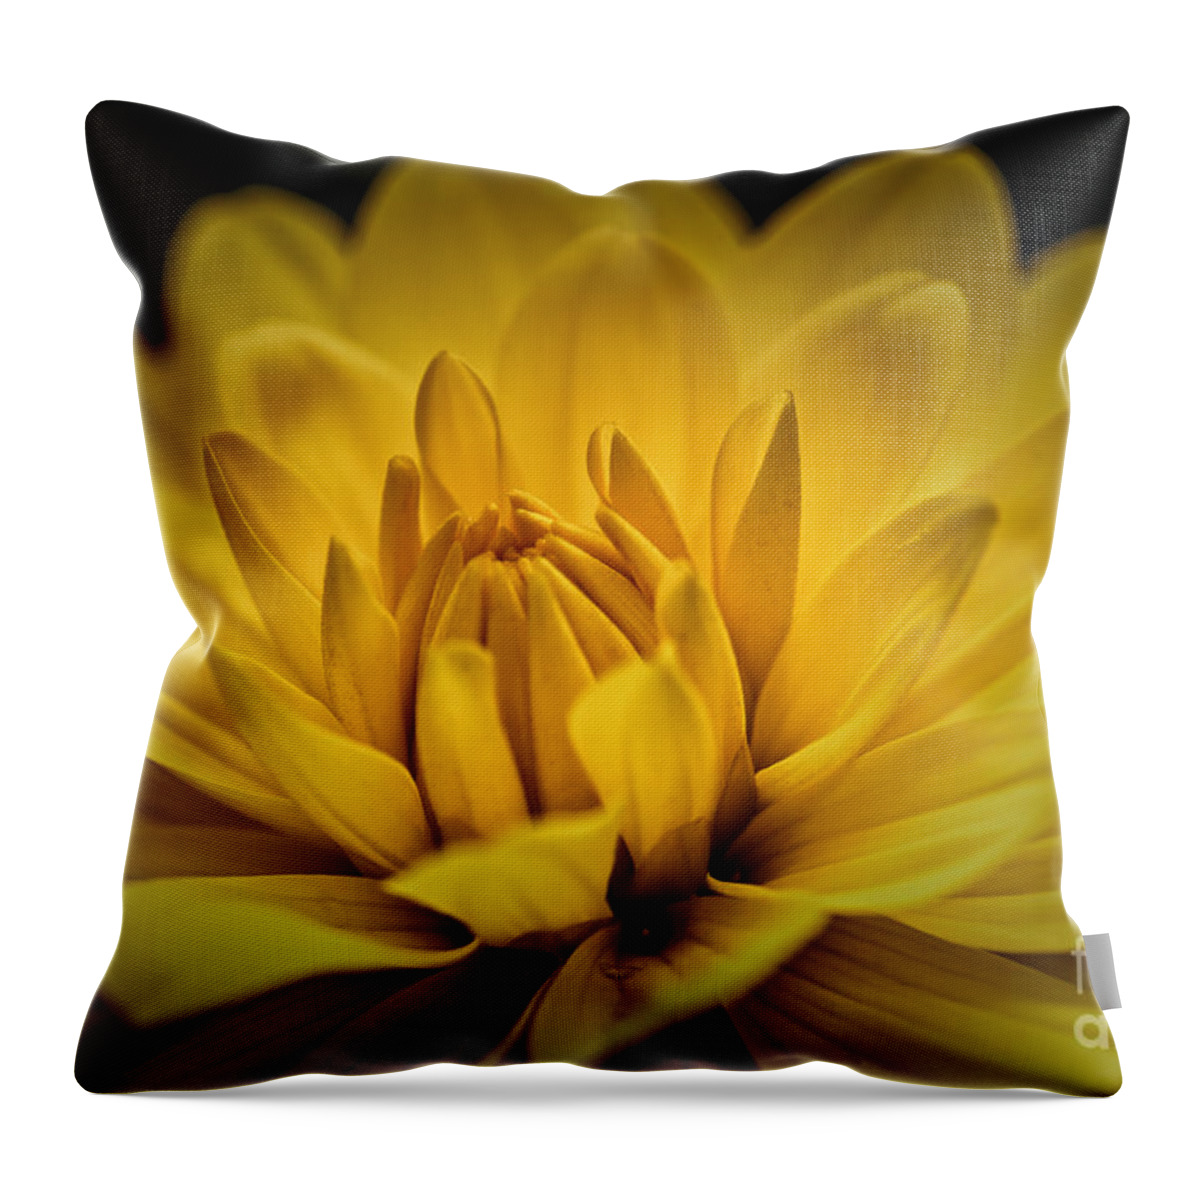 # Nature Throw Pillow featuring the photograph Awakening by Mary Lou Chmura